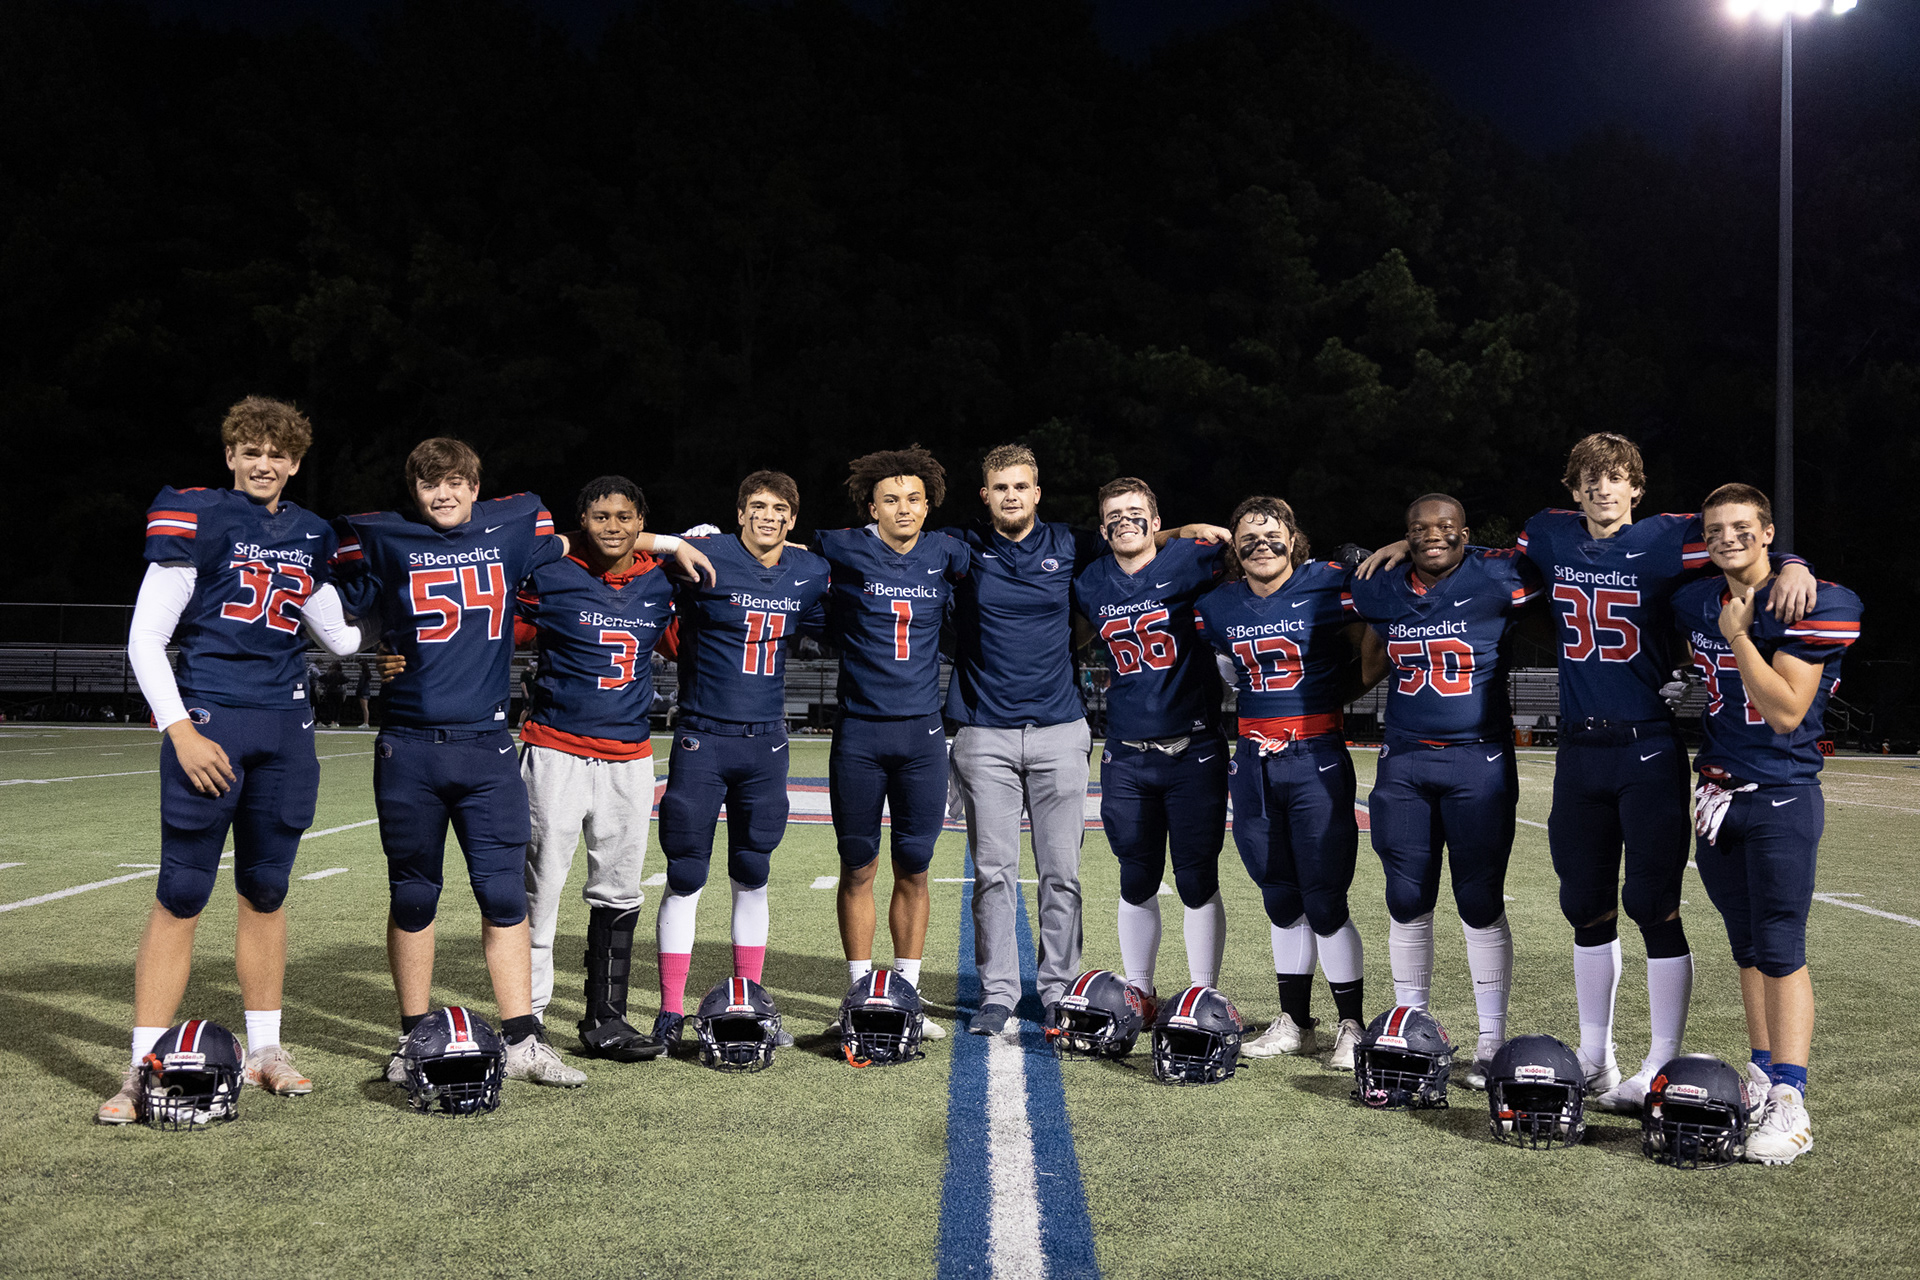 The seniors pose for a pregame photo with Coach Magnifico. (Photo by Ryan Beatty)